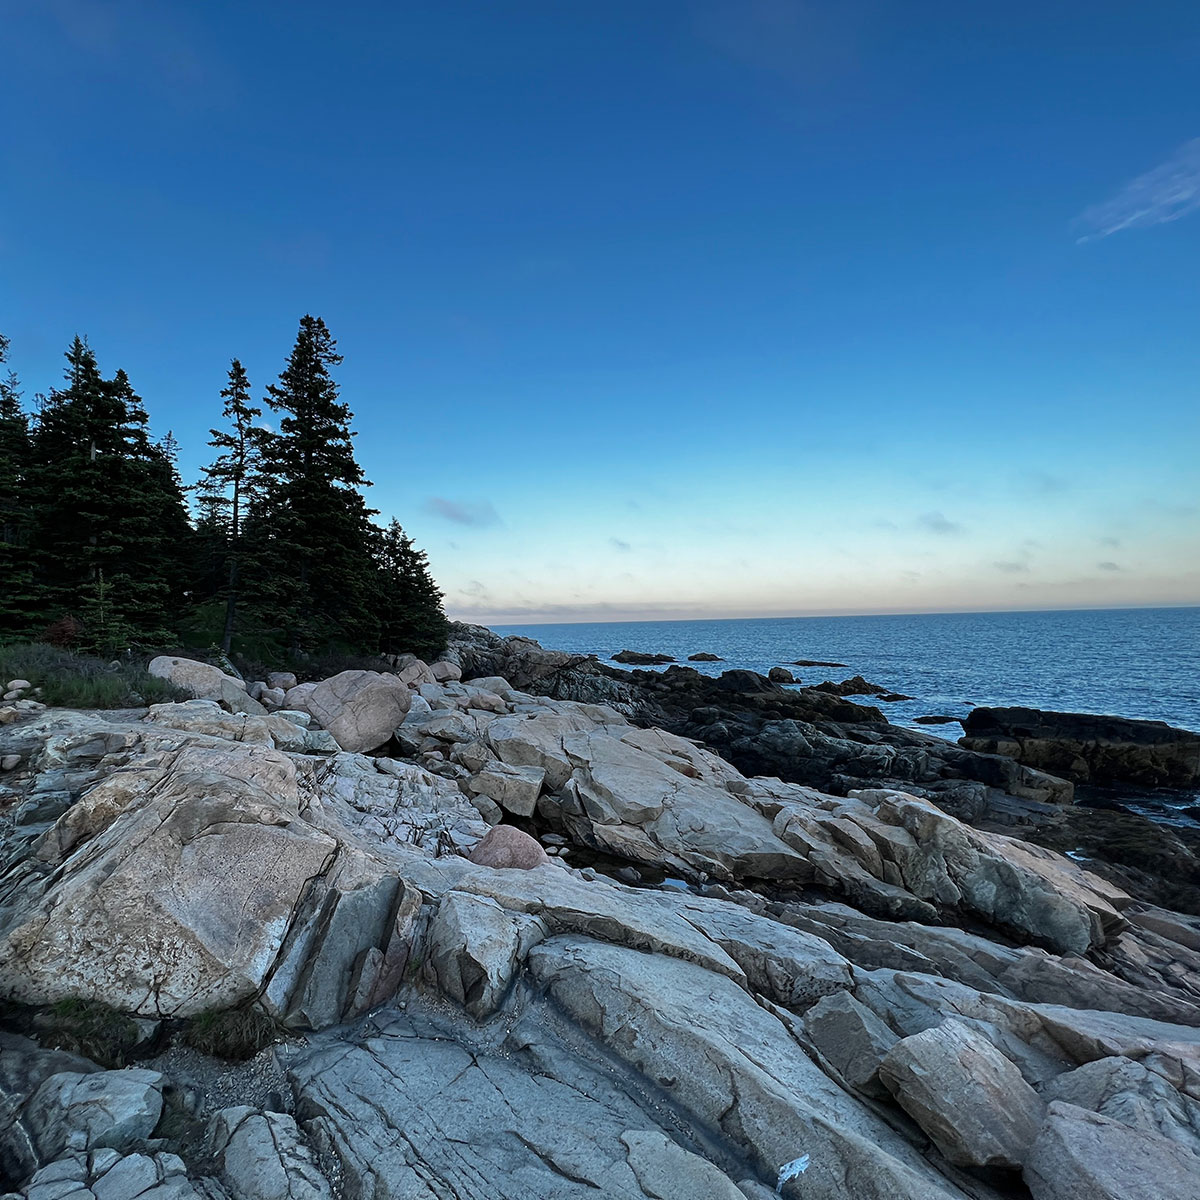 Ocean View from Rocky Coastline in Acadia National Park, Maine